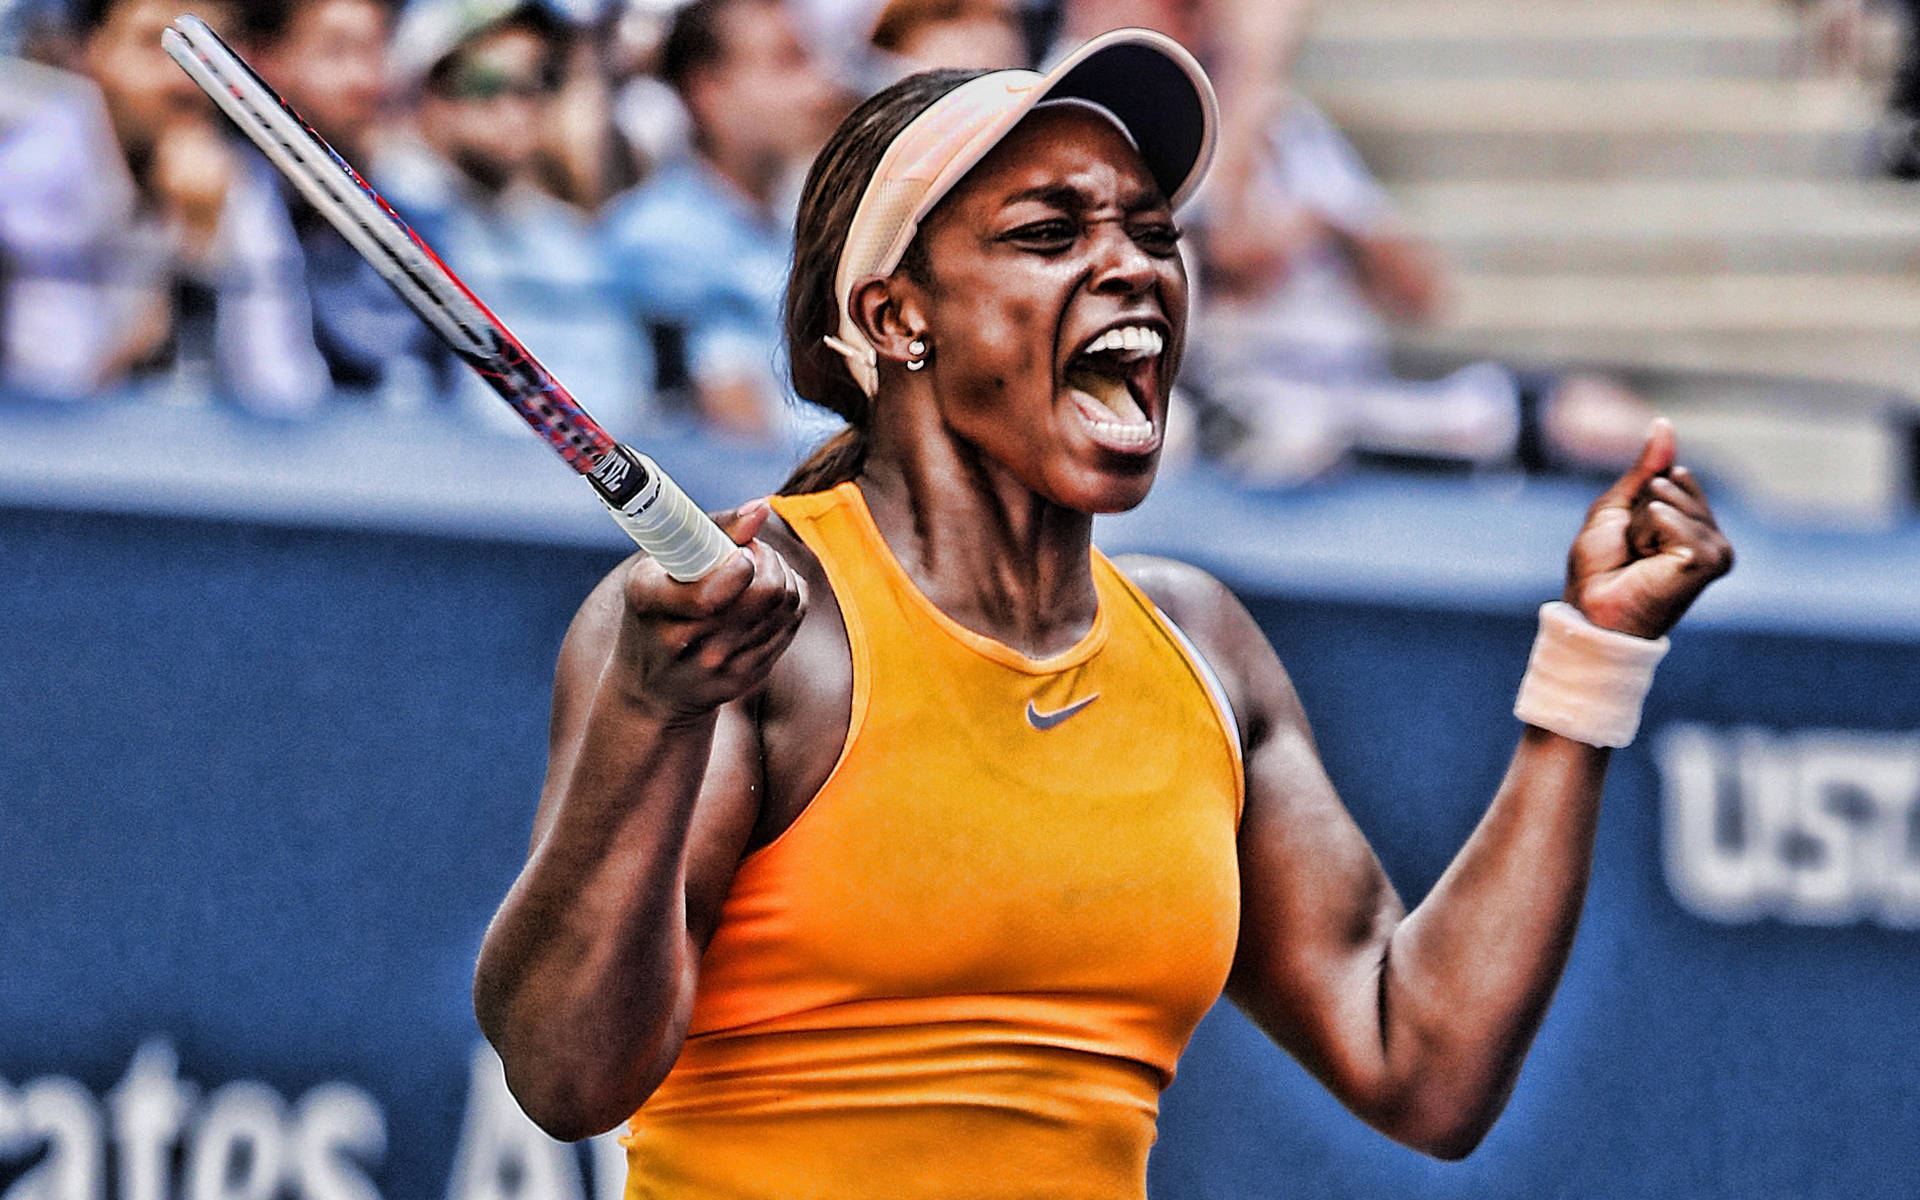 Triumph In Action: Sloane Stephens' Celebratory Fist Pump Background